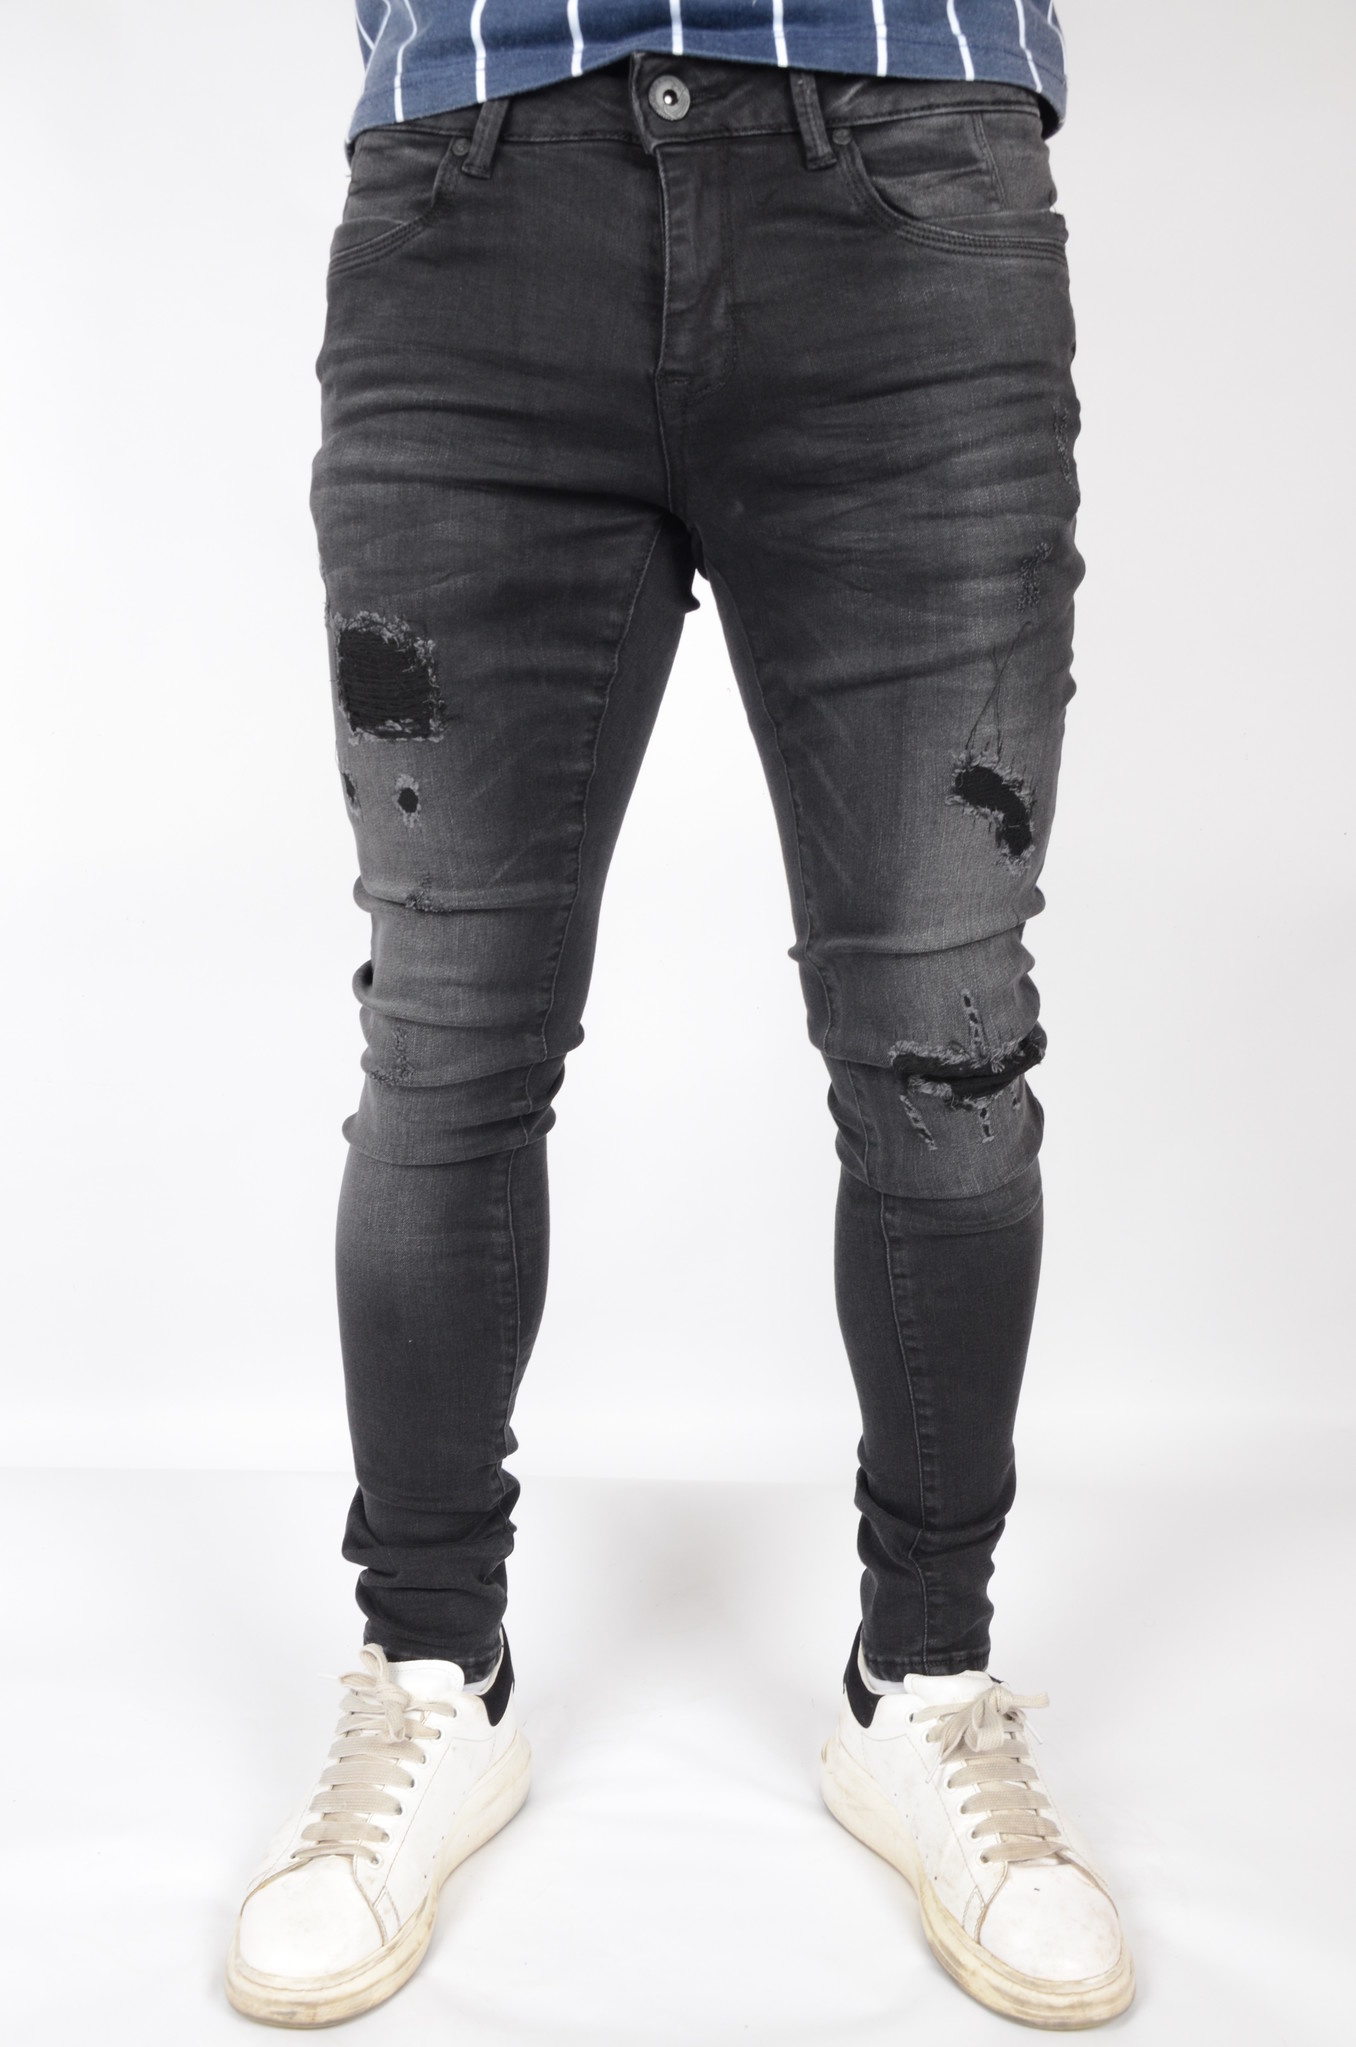 Gabbiano Ultimo Jeans Black Destroyed - Order Now Online